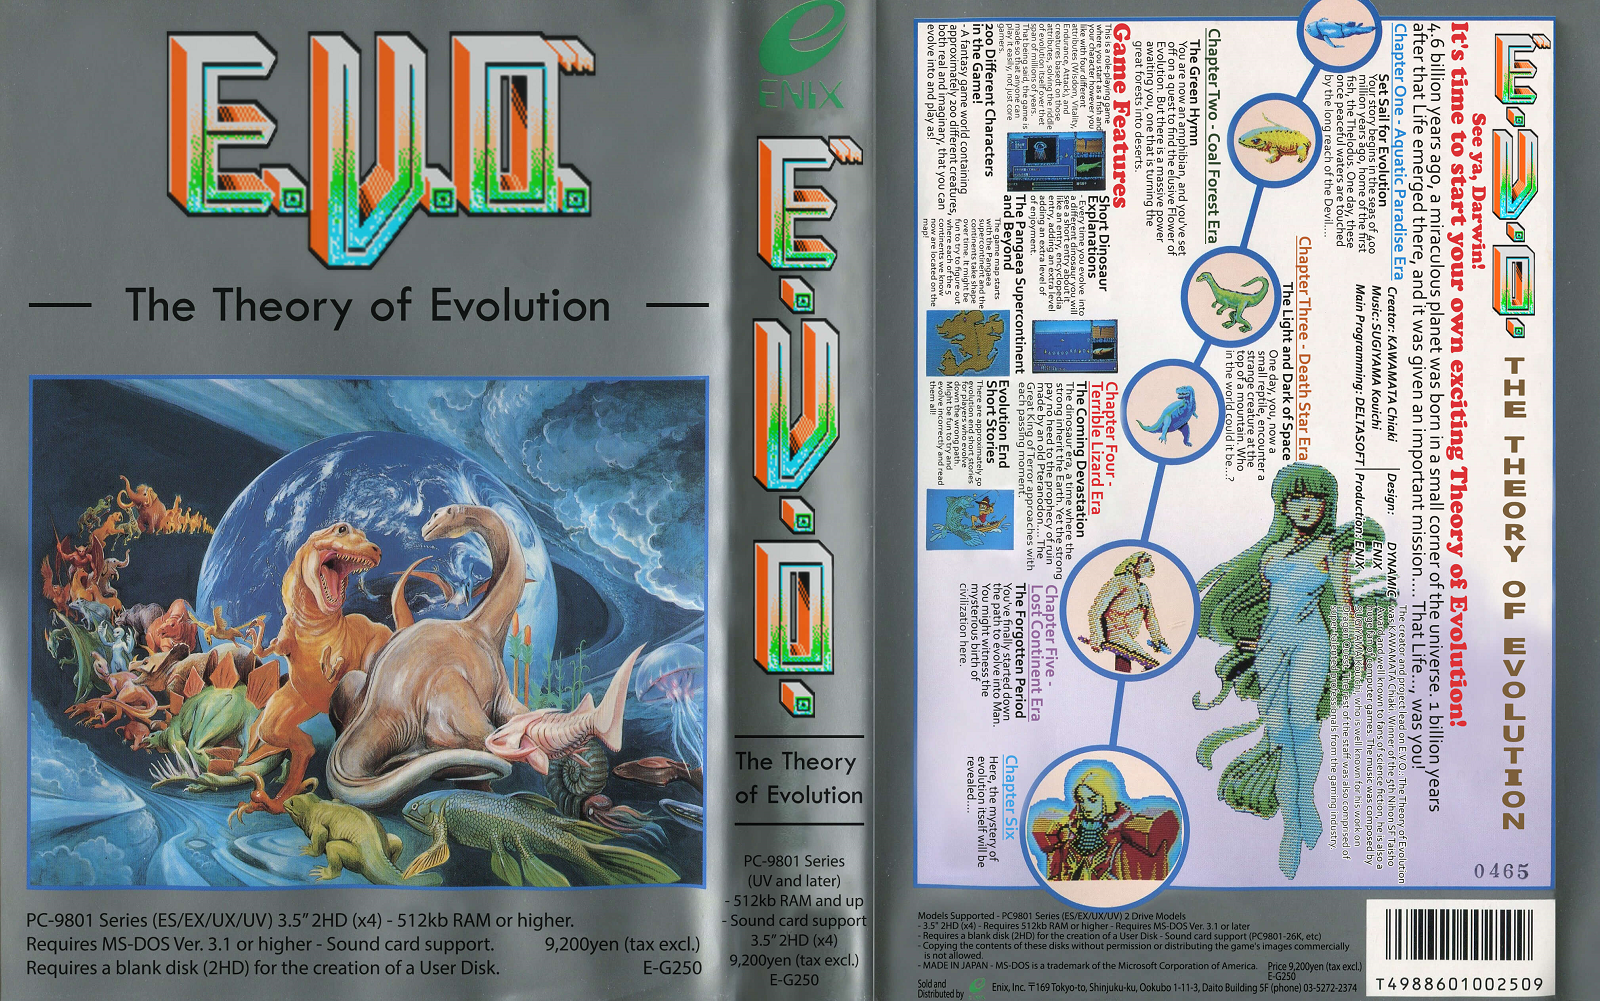 The Japanese Predecessor To E.V.O.: Search For Eden Now Has A Full English Translation